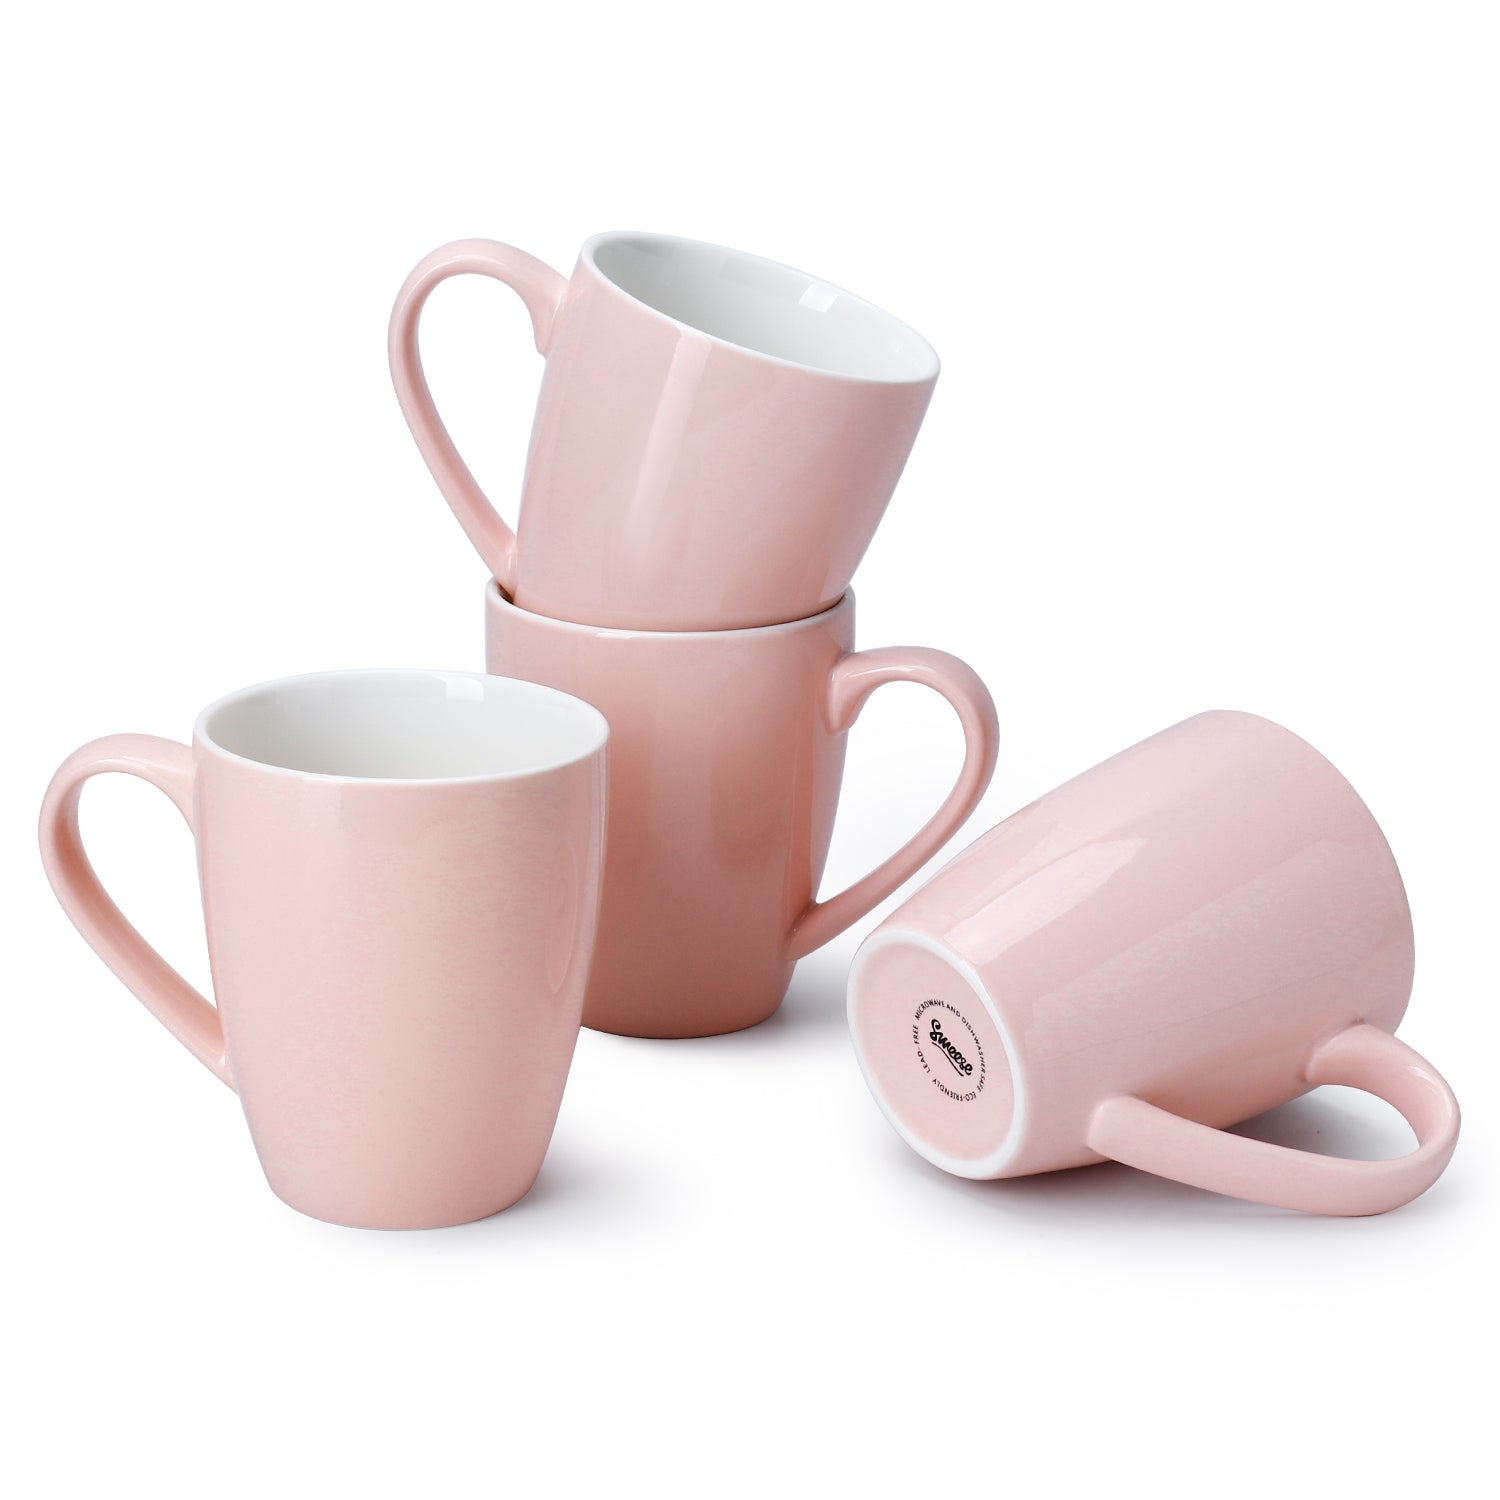 Sweese Porcelain Mugs - 16 Ounce (Top to the Rim) for